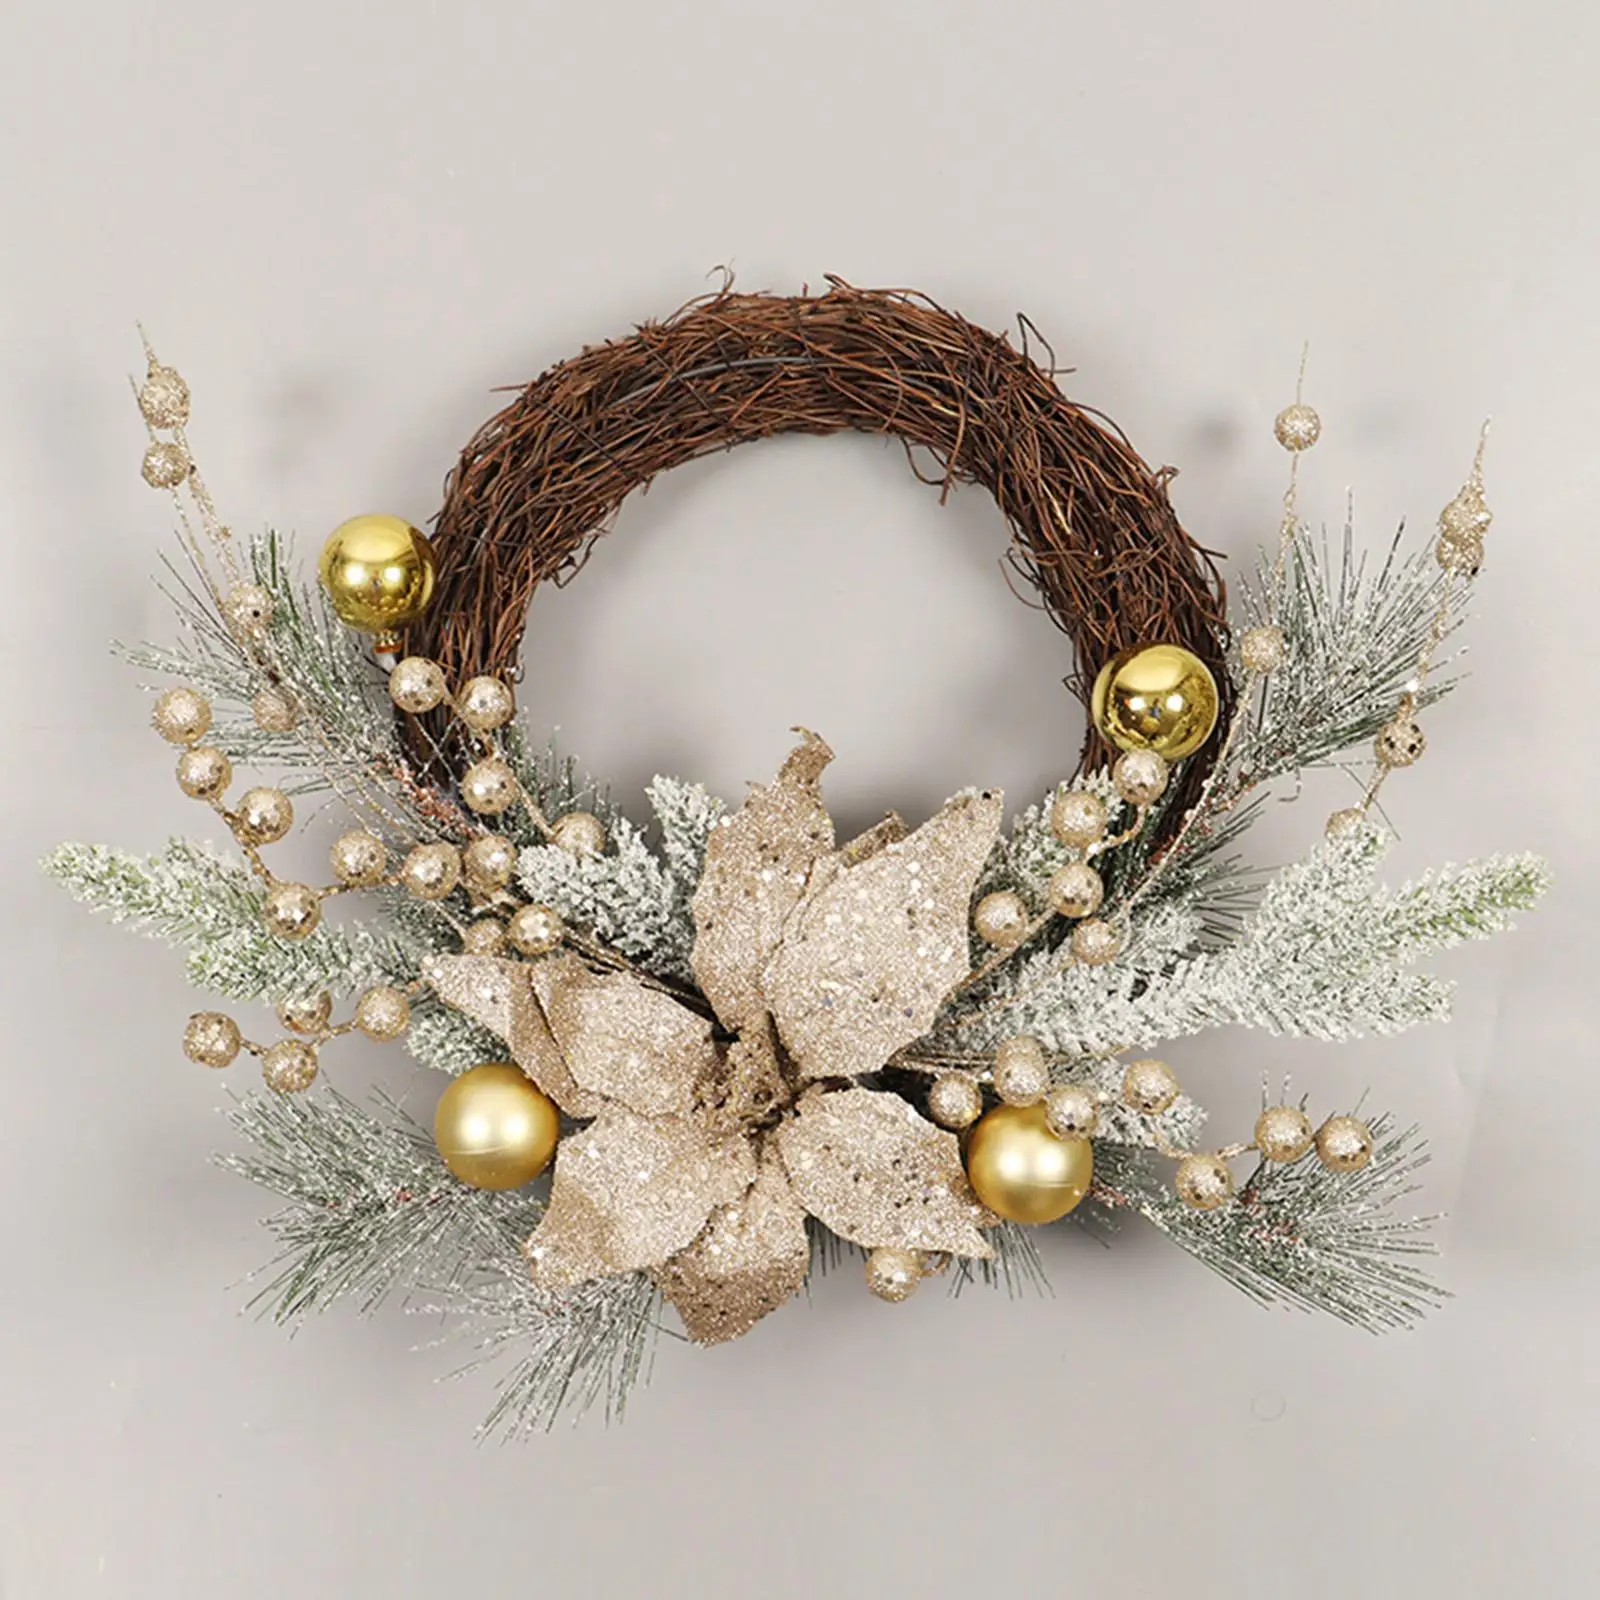 Christmas Wreath with Lights Christmas Door Hanging Decoration Christmas Vine Wreath for Xmas Farmhouse Indoor Window Outside